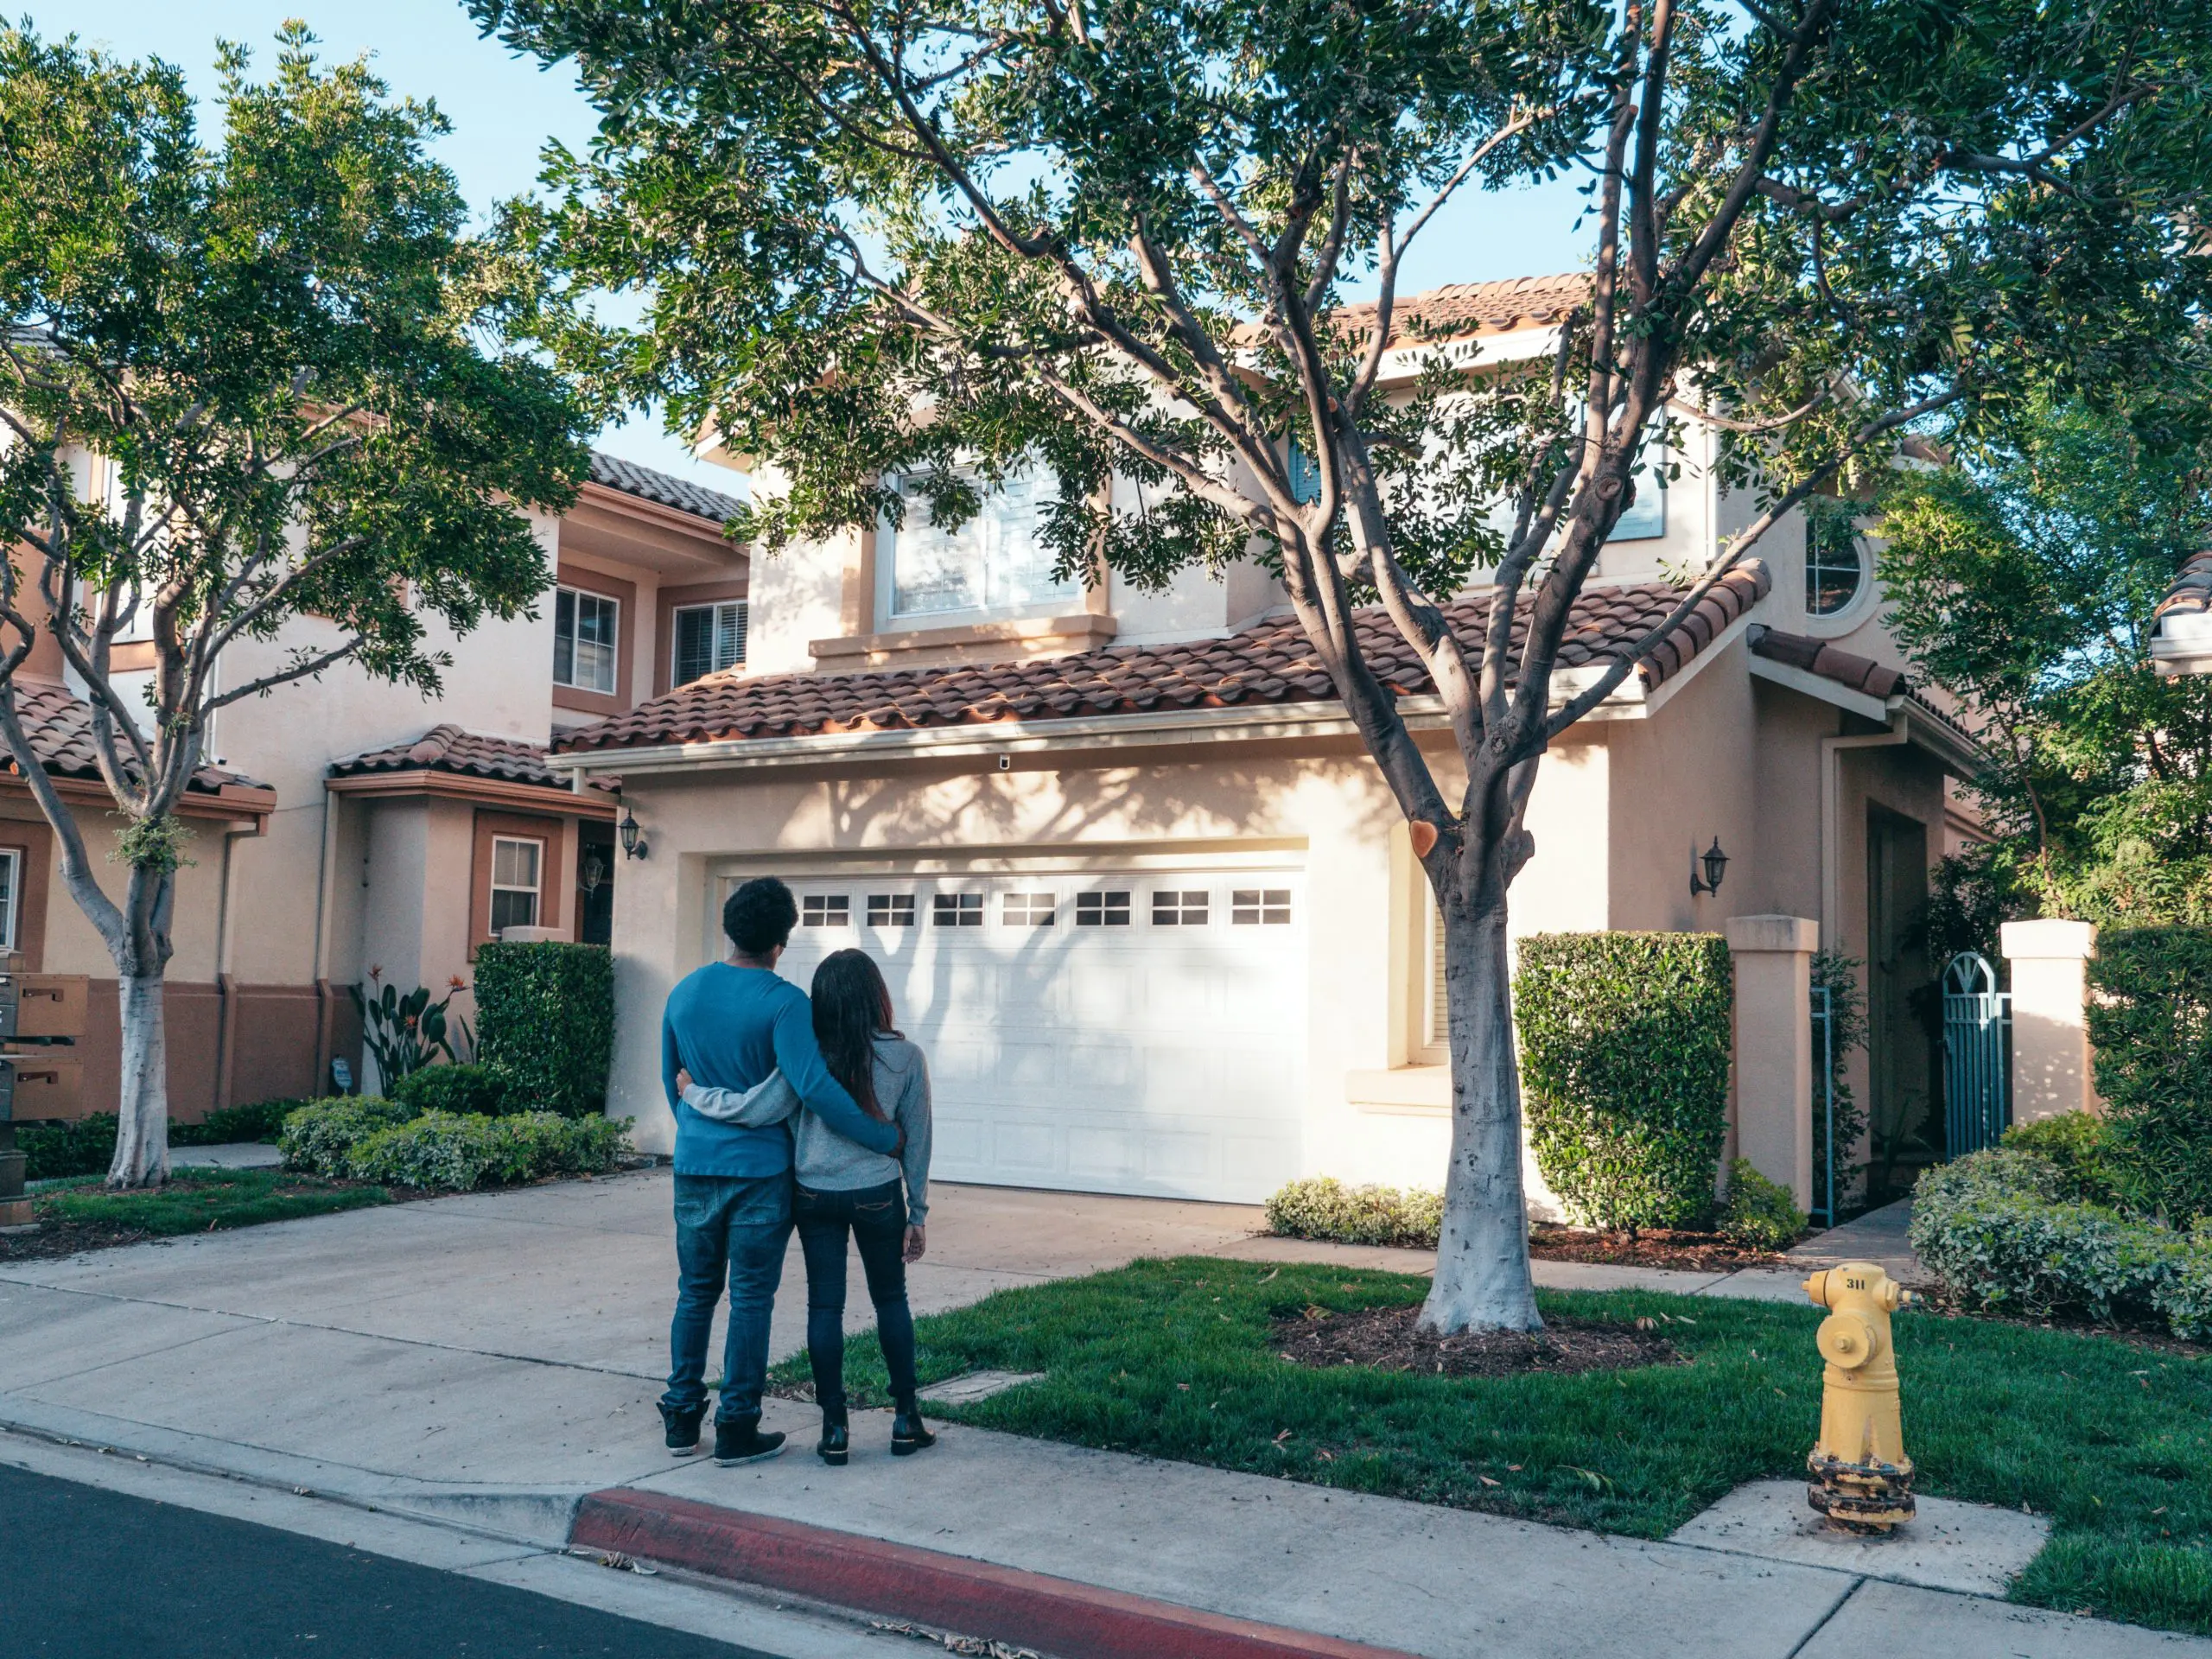 Joint Property Ownership: How Prenups Simplify Real Estate Matters for Couples